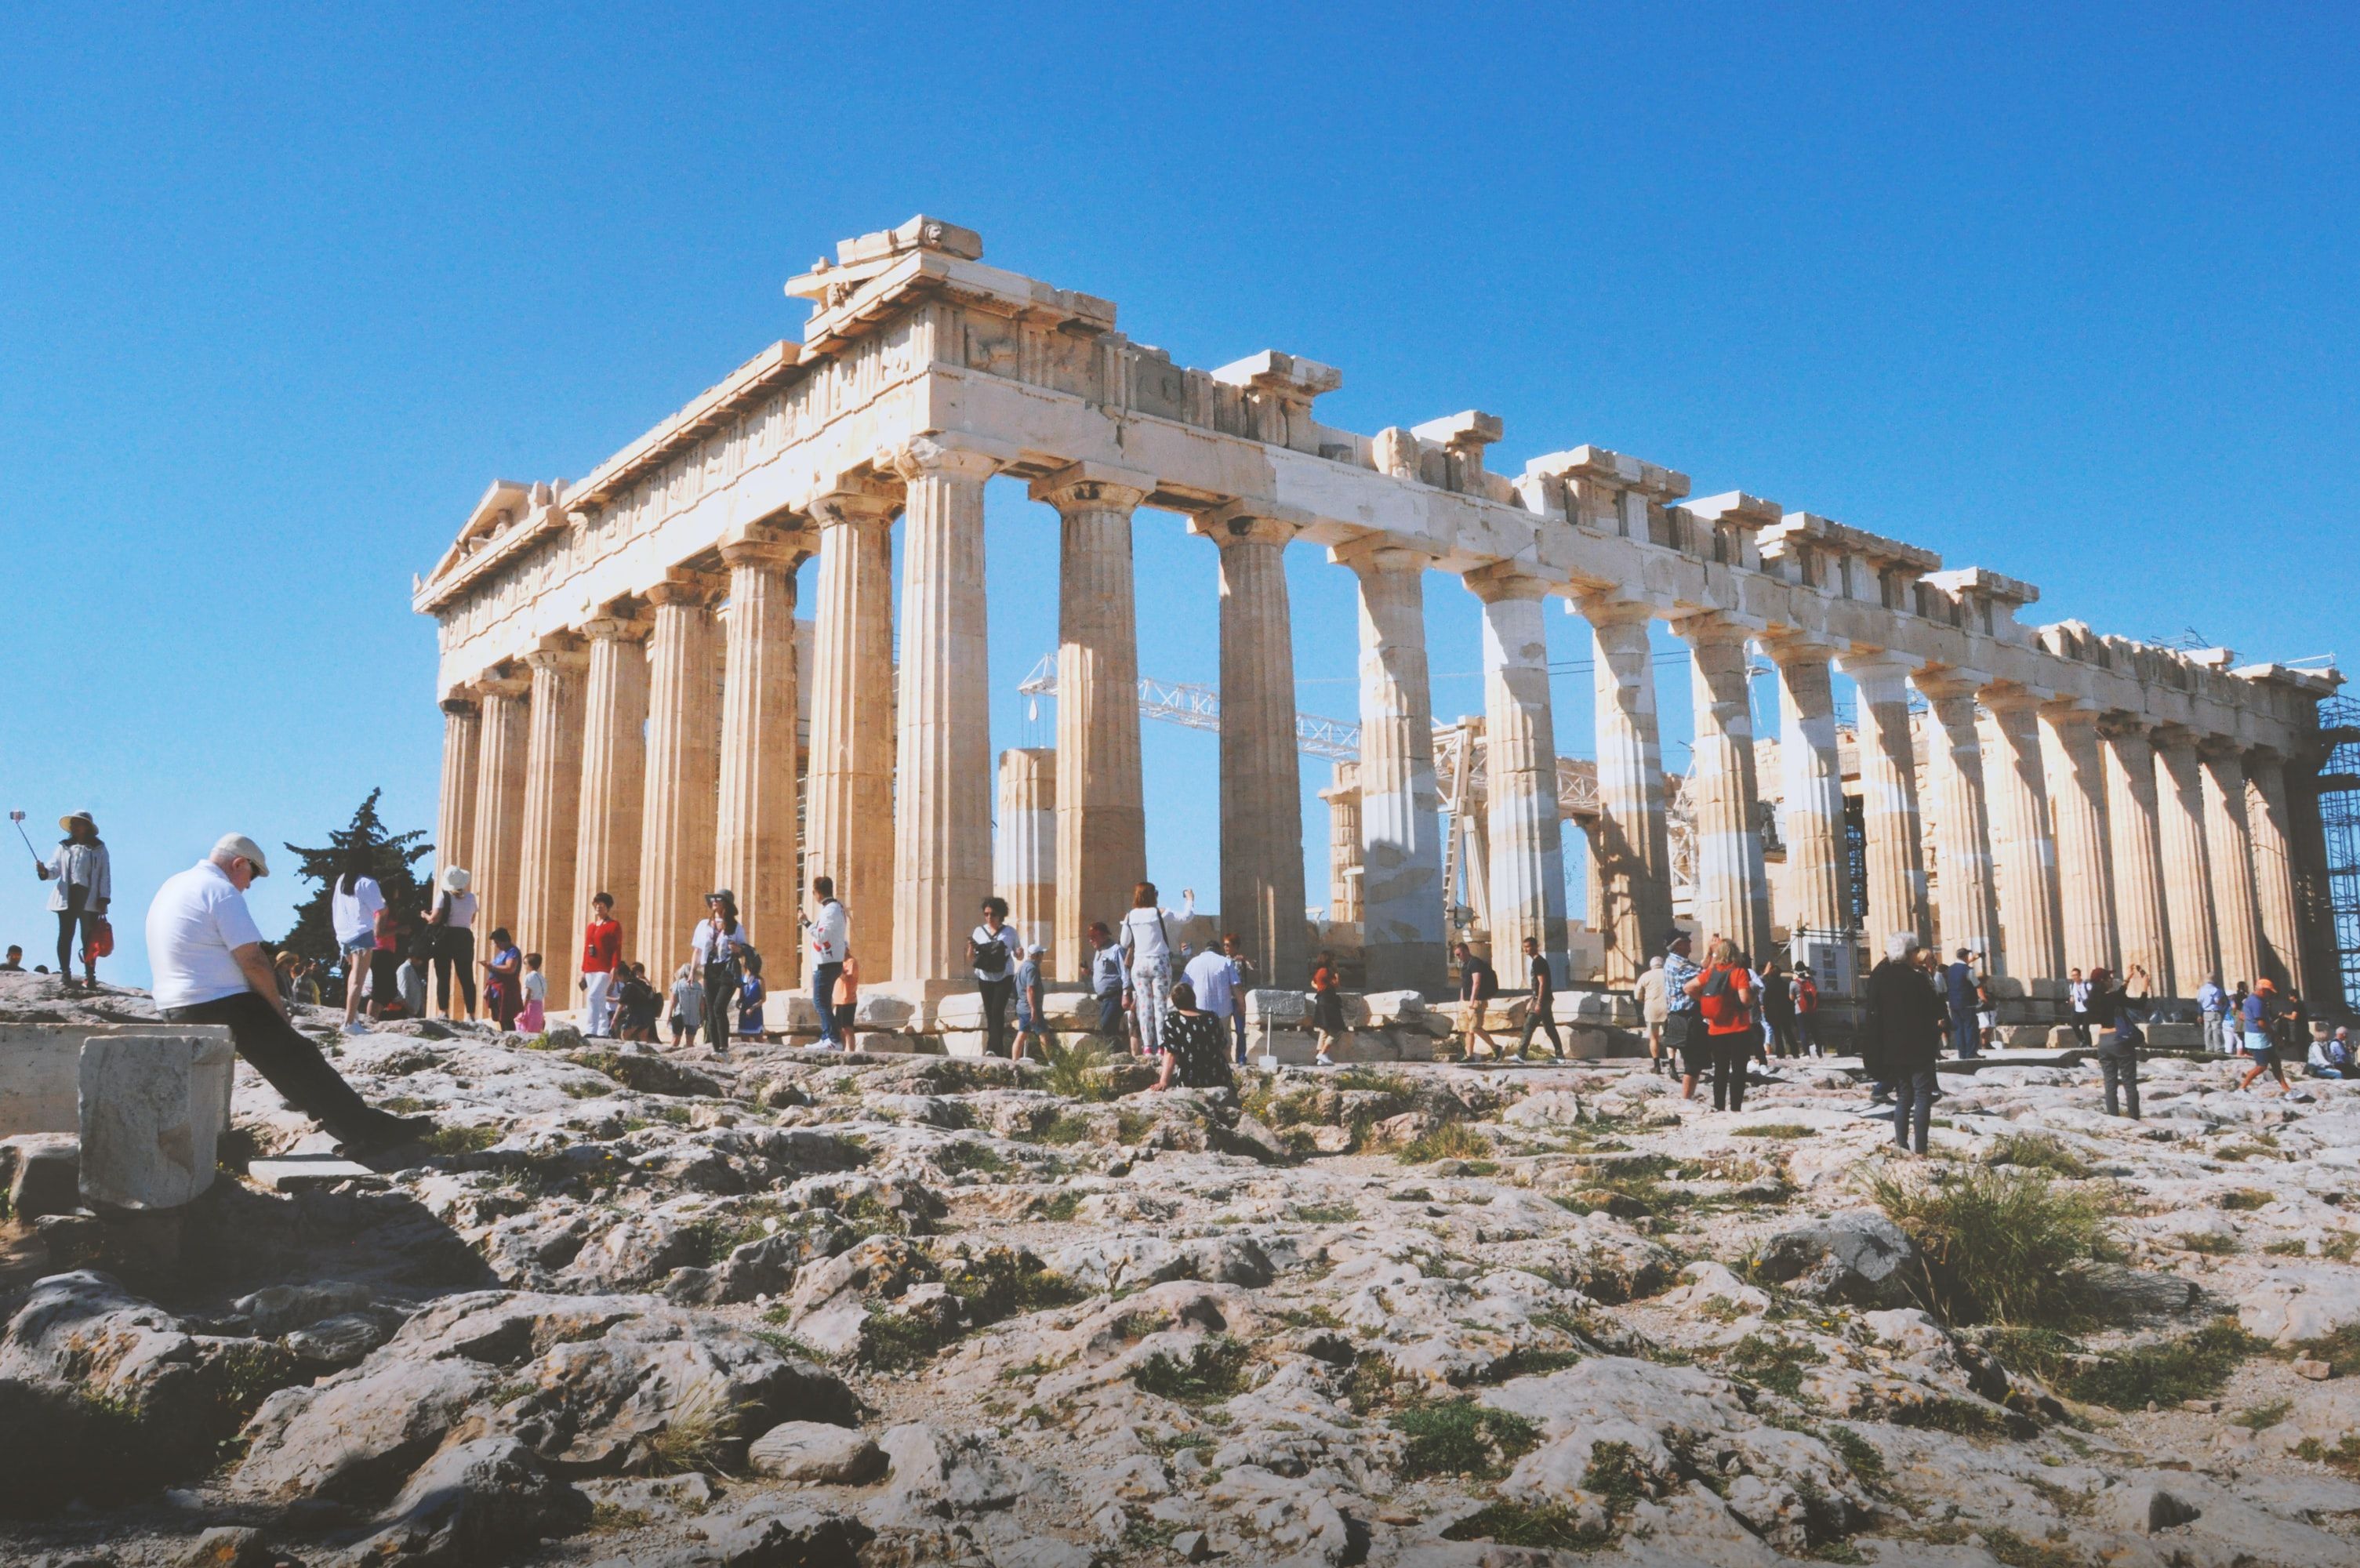 The temple of Acropolis in Athens, Greece, surrounded by tourists